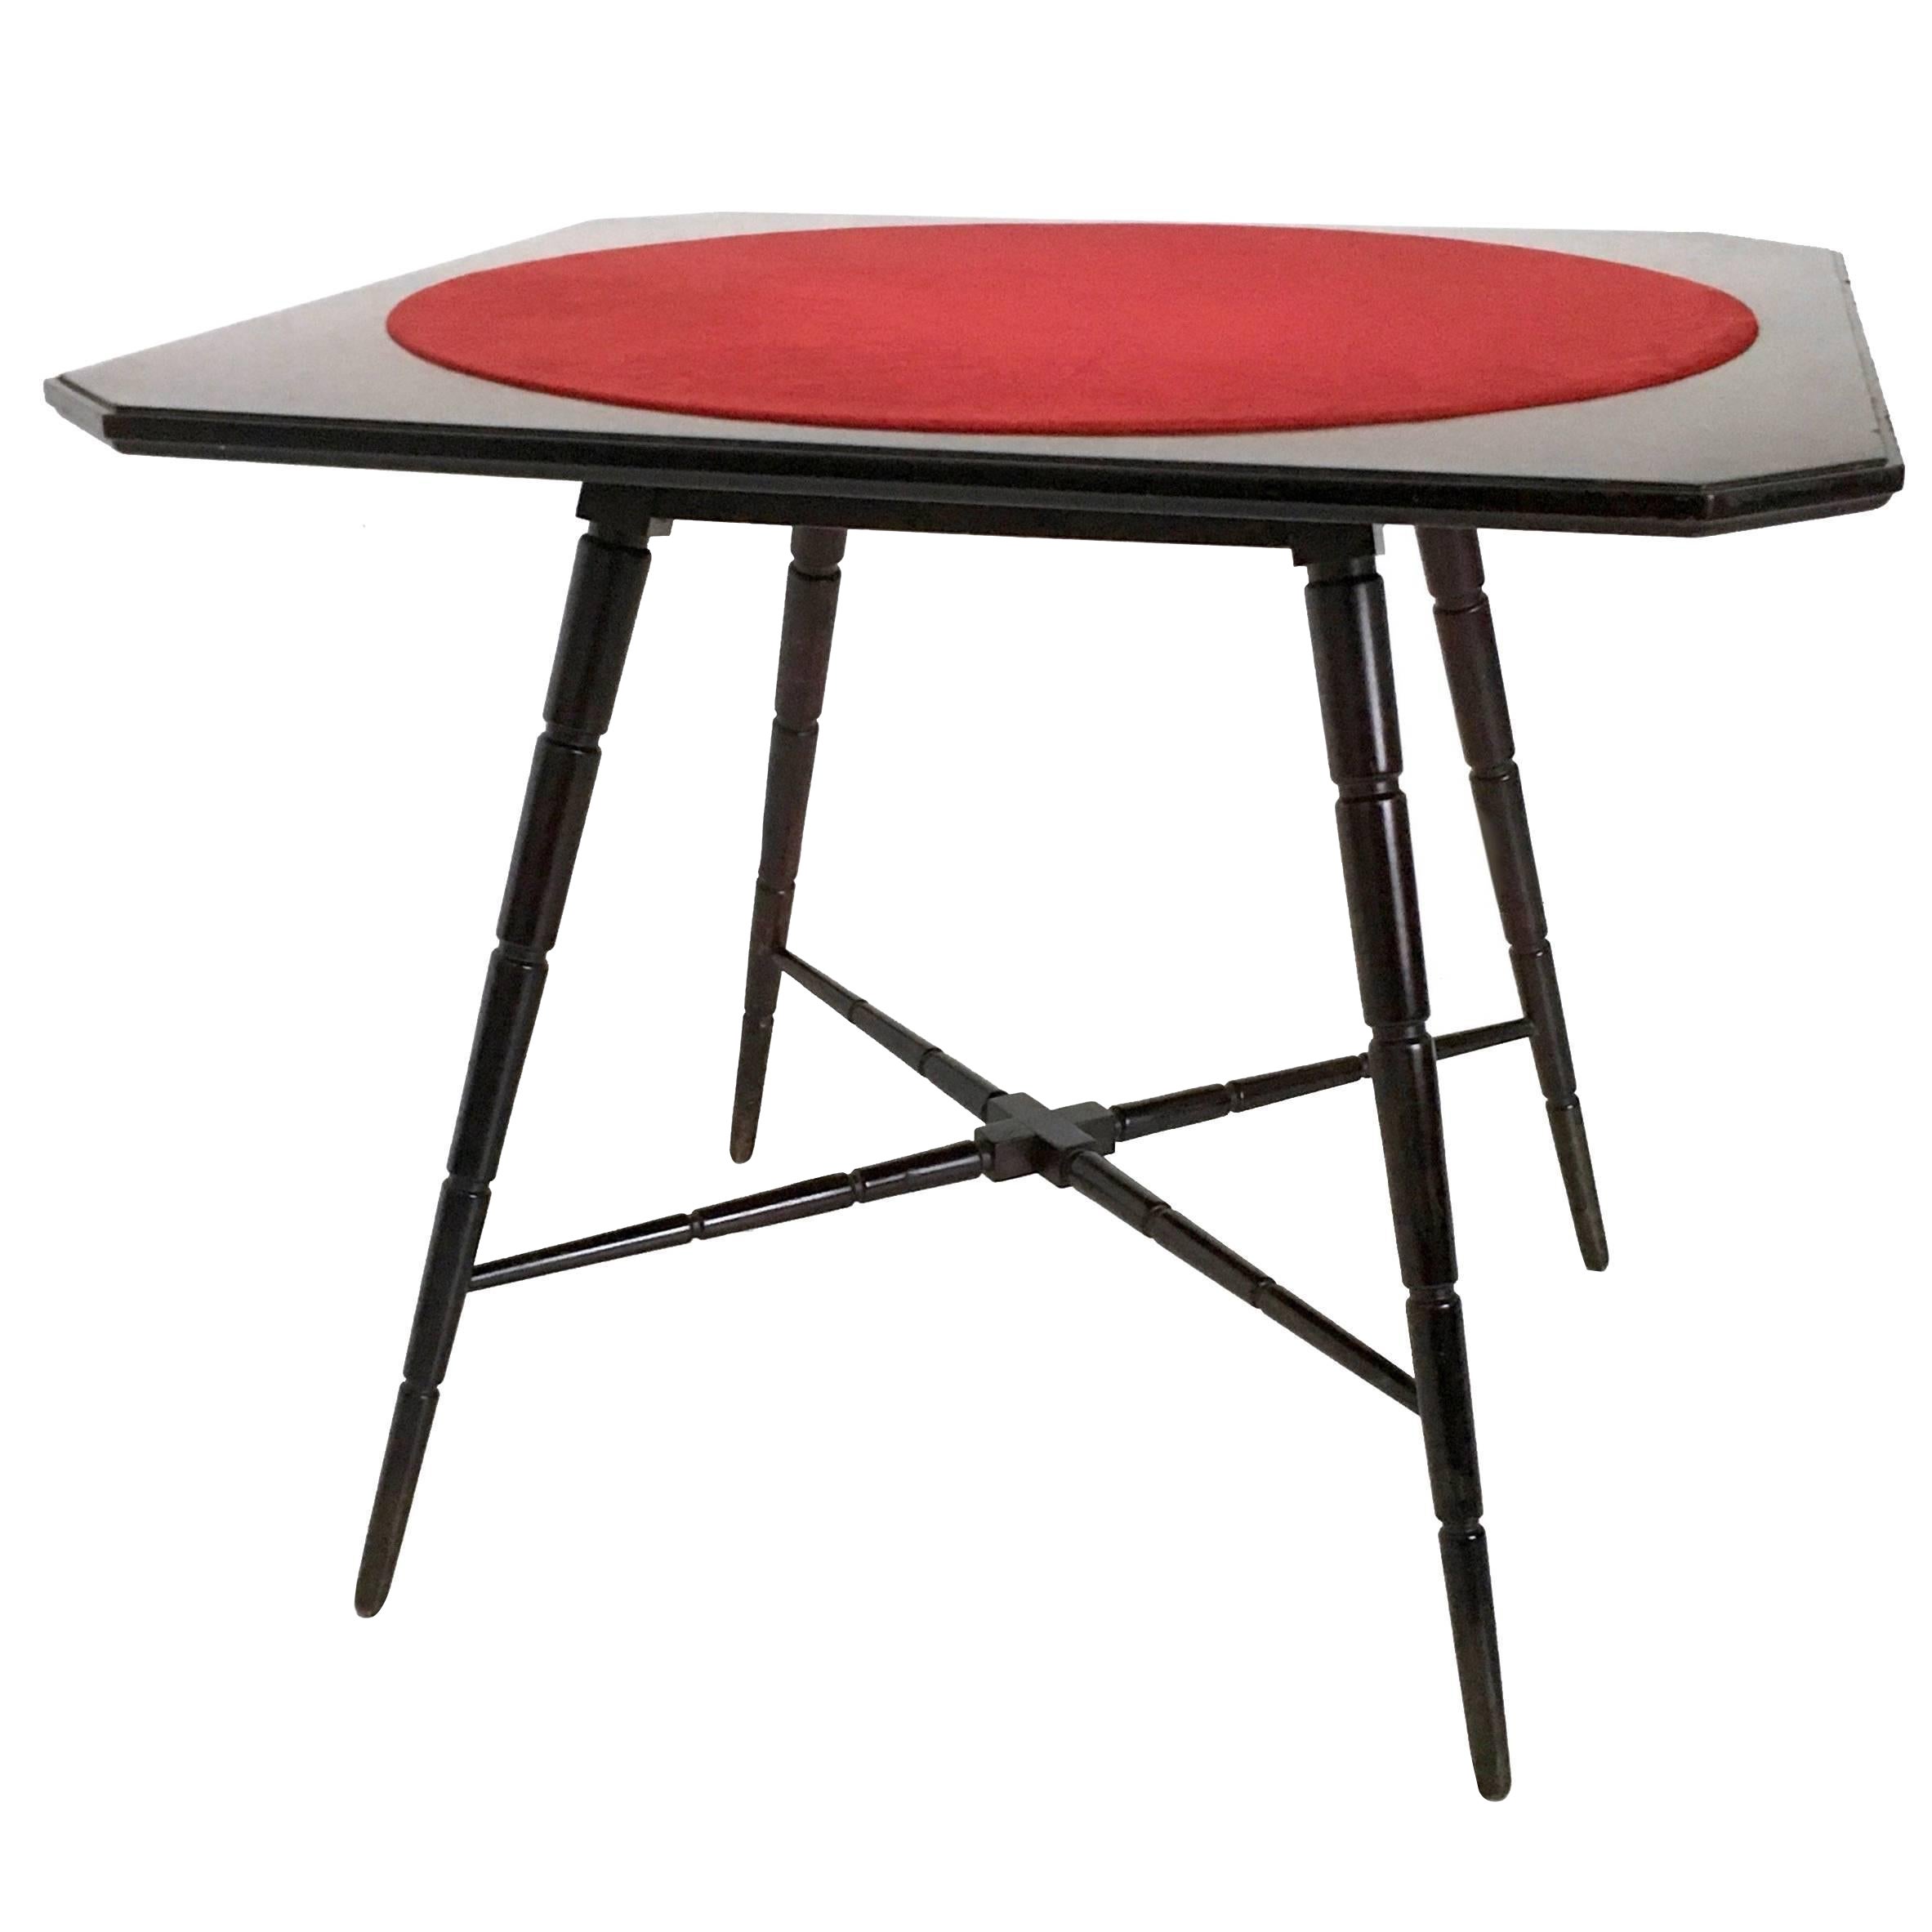 Made in Italy, 1950s.
It features a wooden and turned ebonized beech frame and its red original fabric top.
The wooden structure doesn't need to be restored.
It is a vintage piece, therefore it might show slight traces of use, but it can be